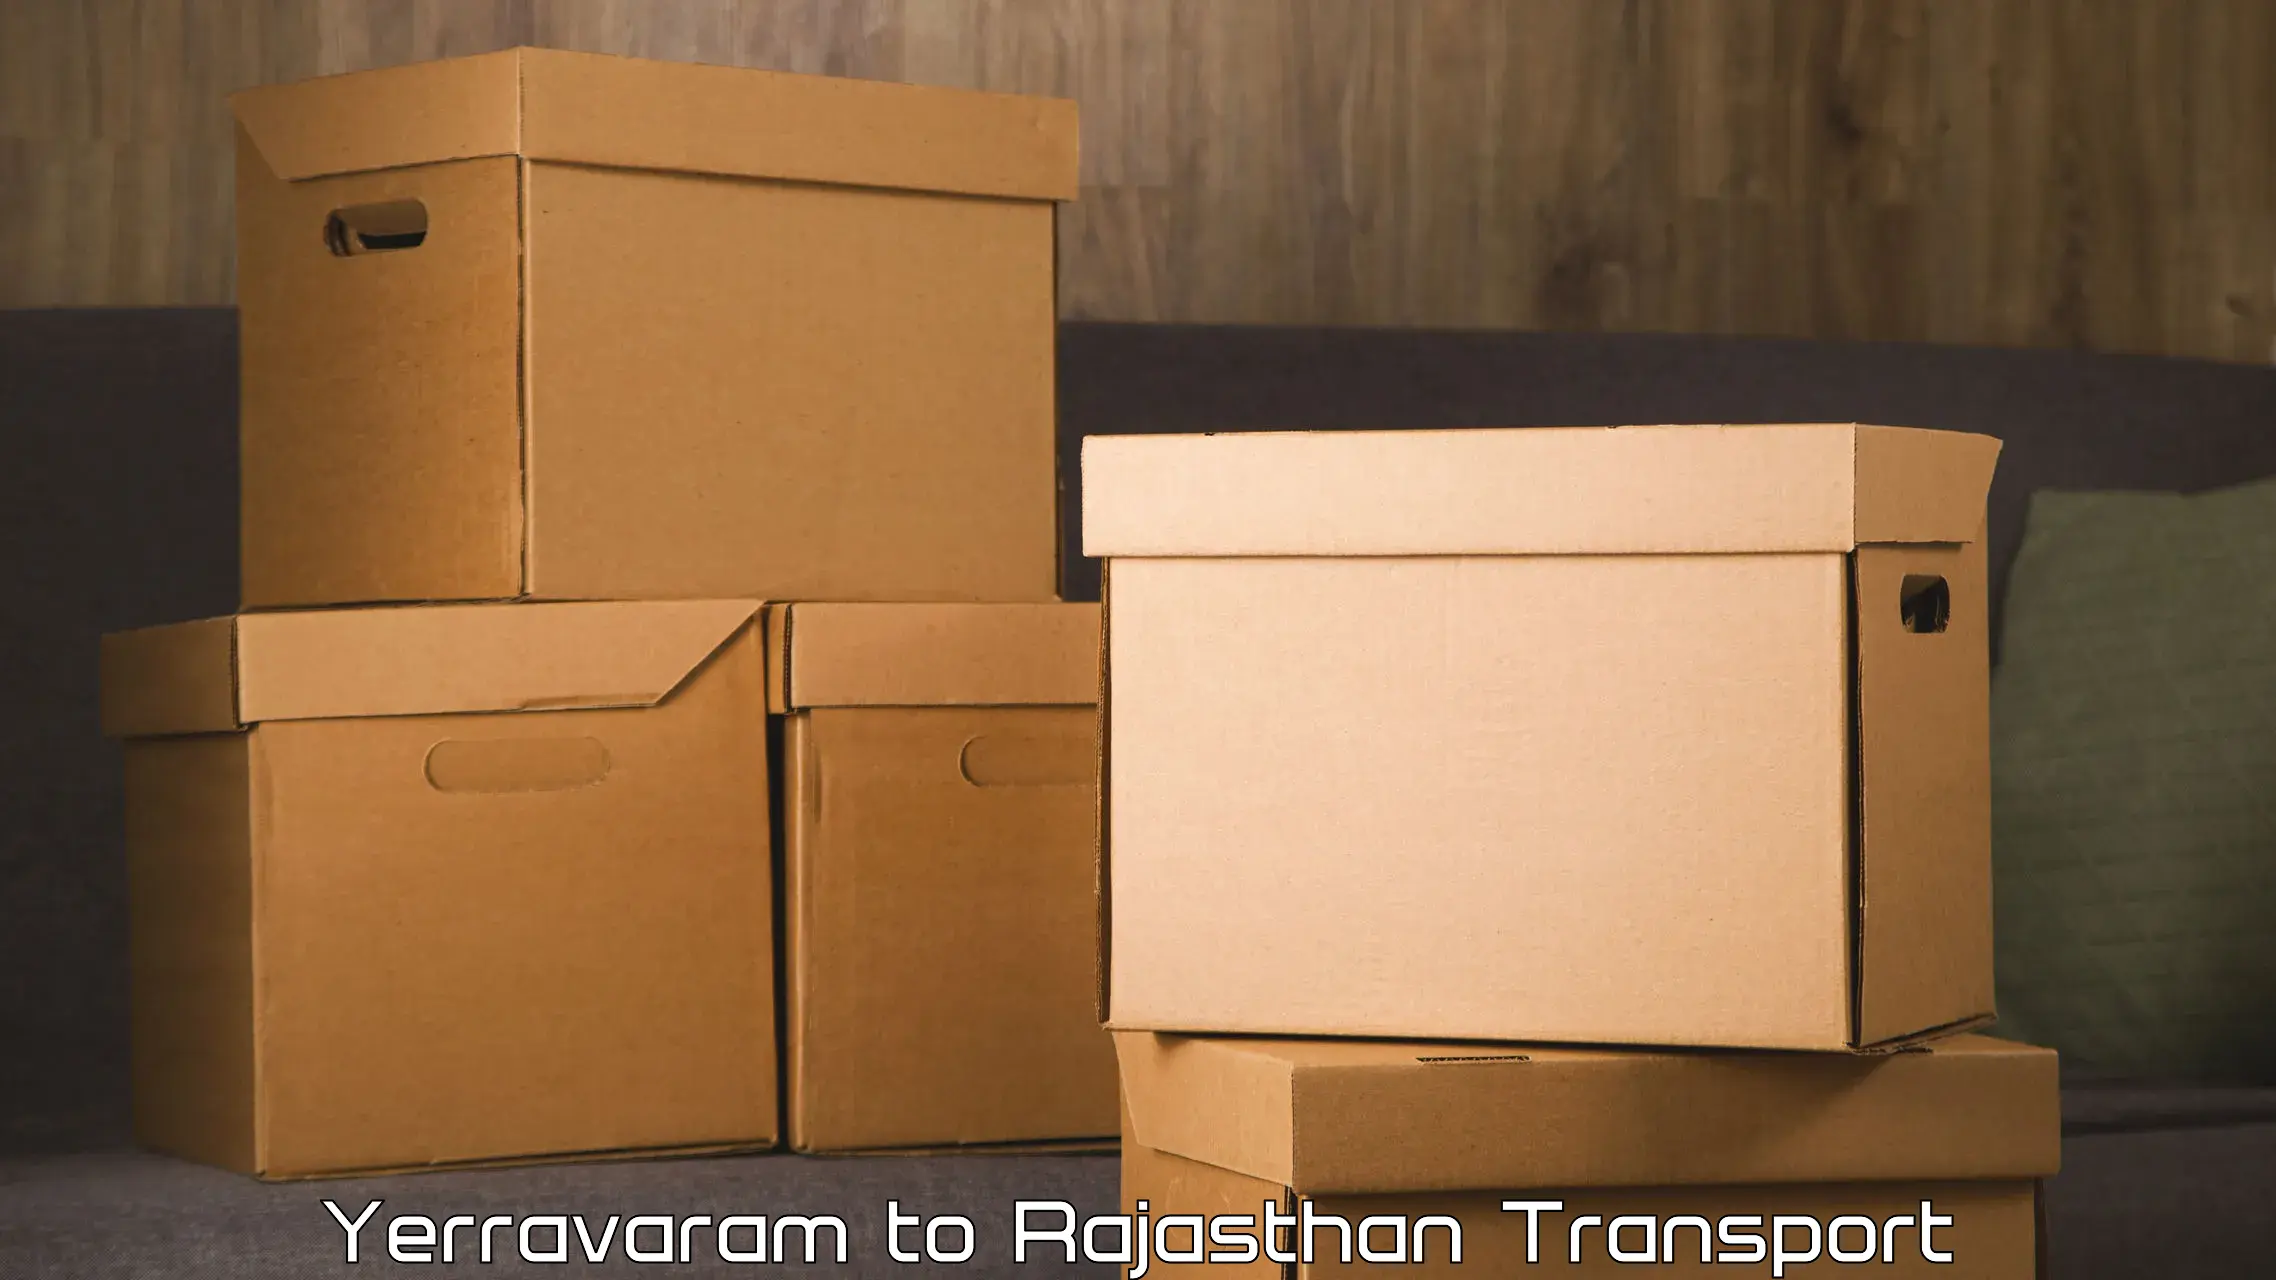 Air freight transport services in Yerravaram to Yeswanthapur